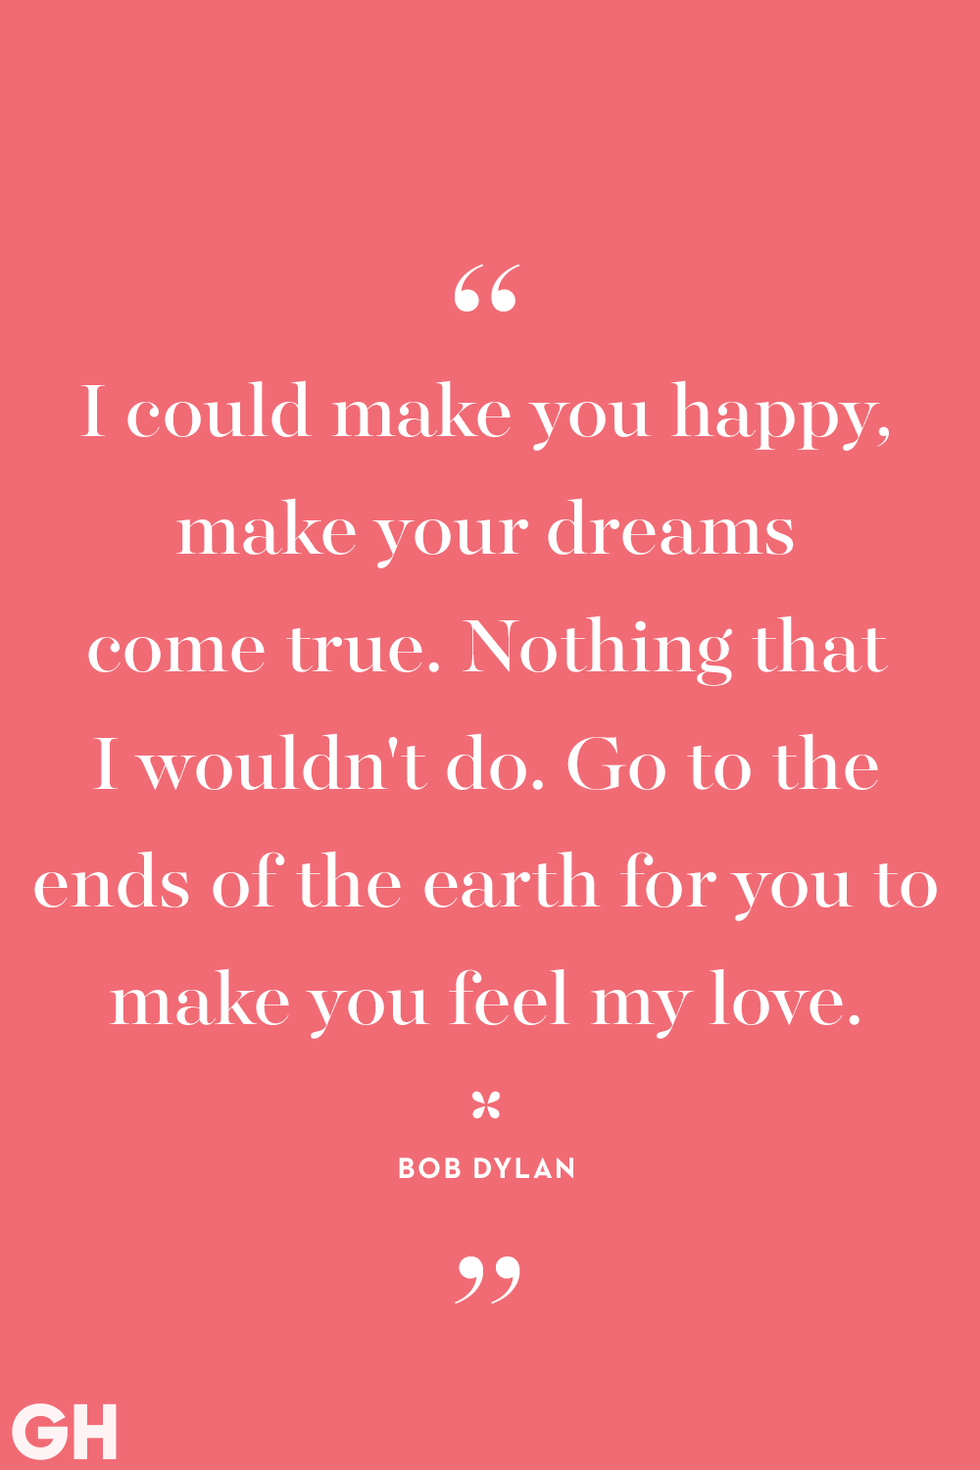 50 Love Quotes for Her That Express Exactly How You Feel